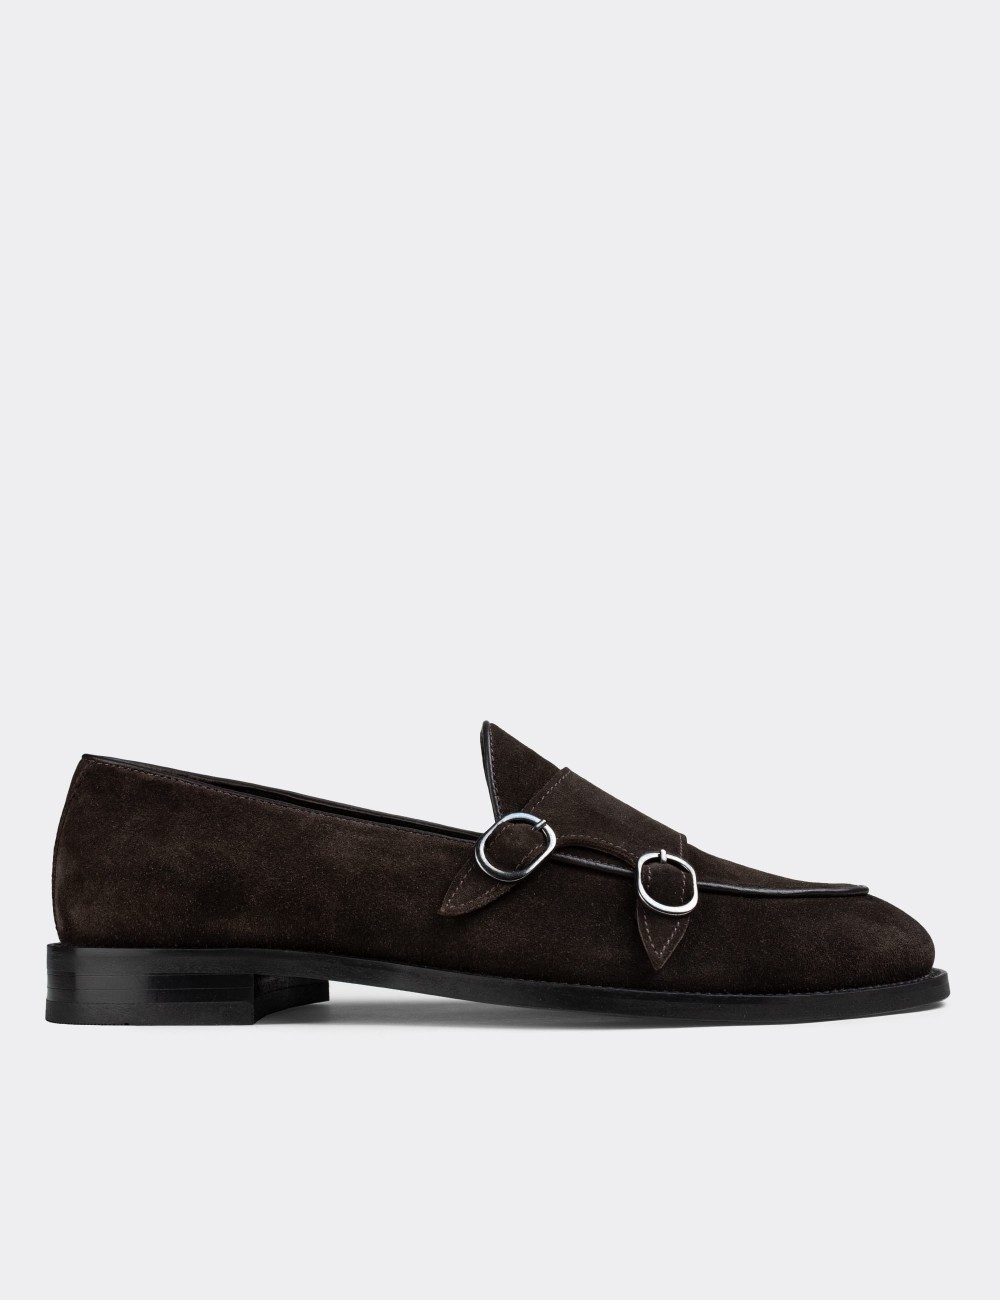 Brown Suede Leather Double Monk-Strap Loafers - 01844MKHVN01